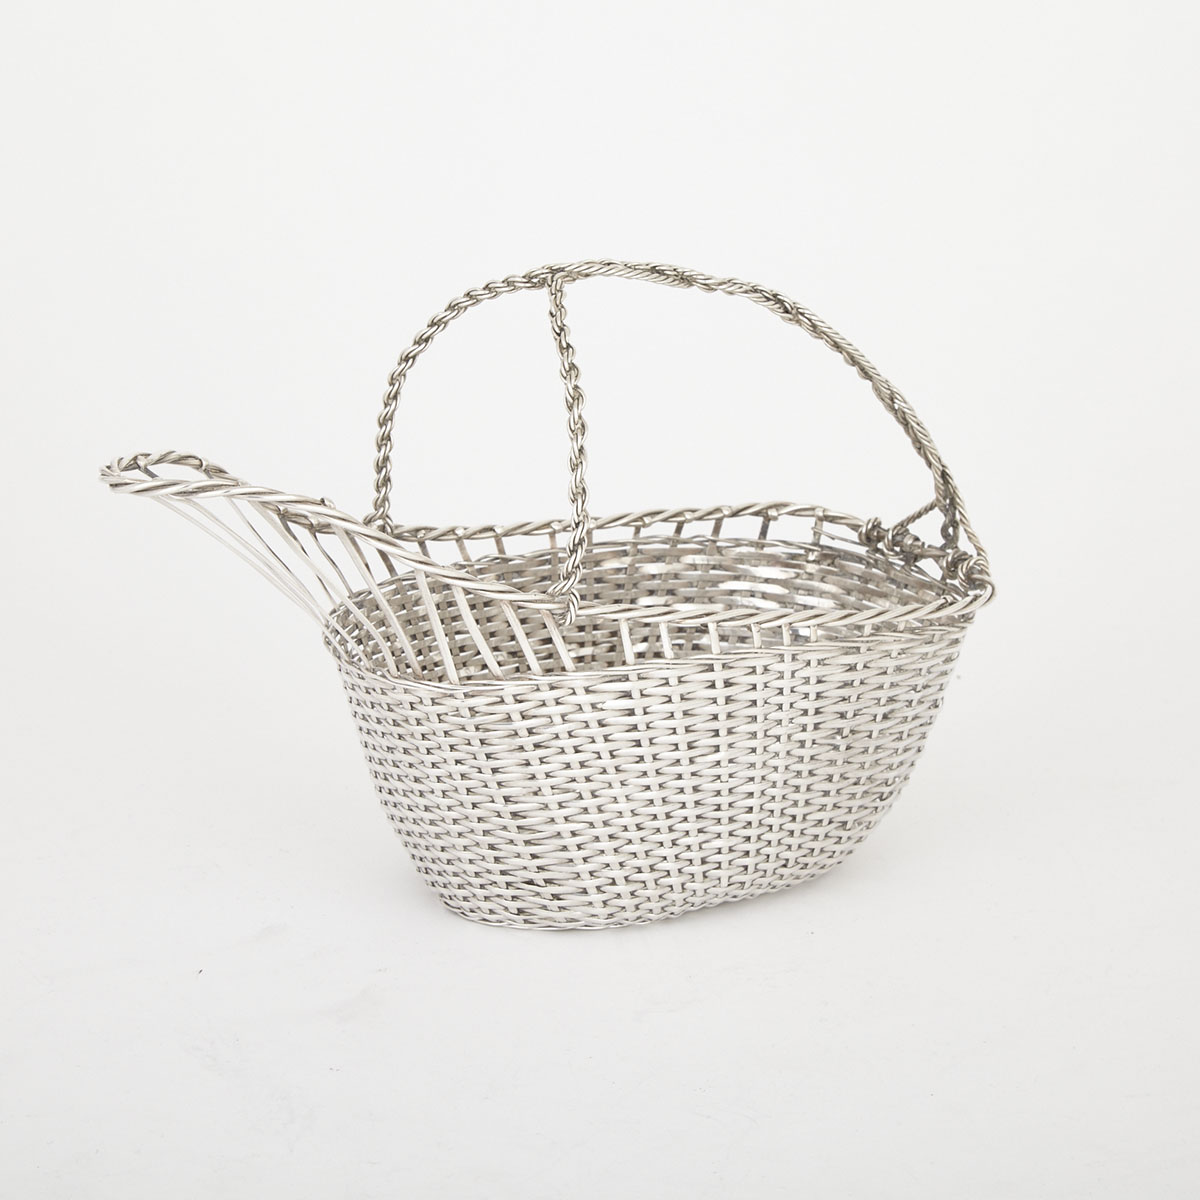 Mexican Silver Wine Basket, mid-20th century